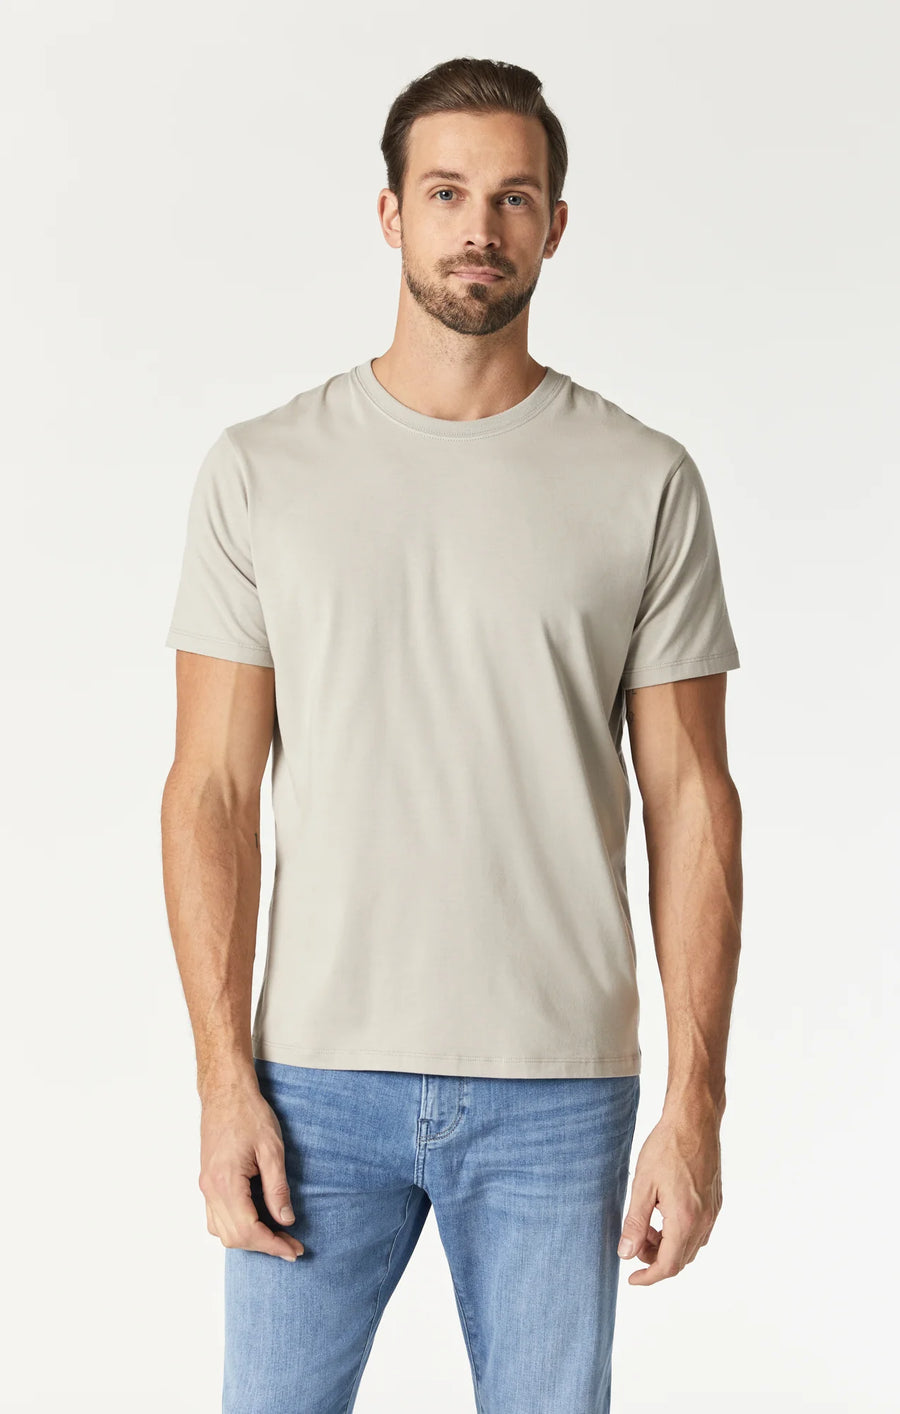 Natural Dyed Tee